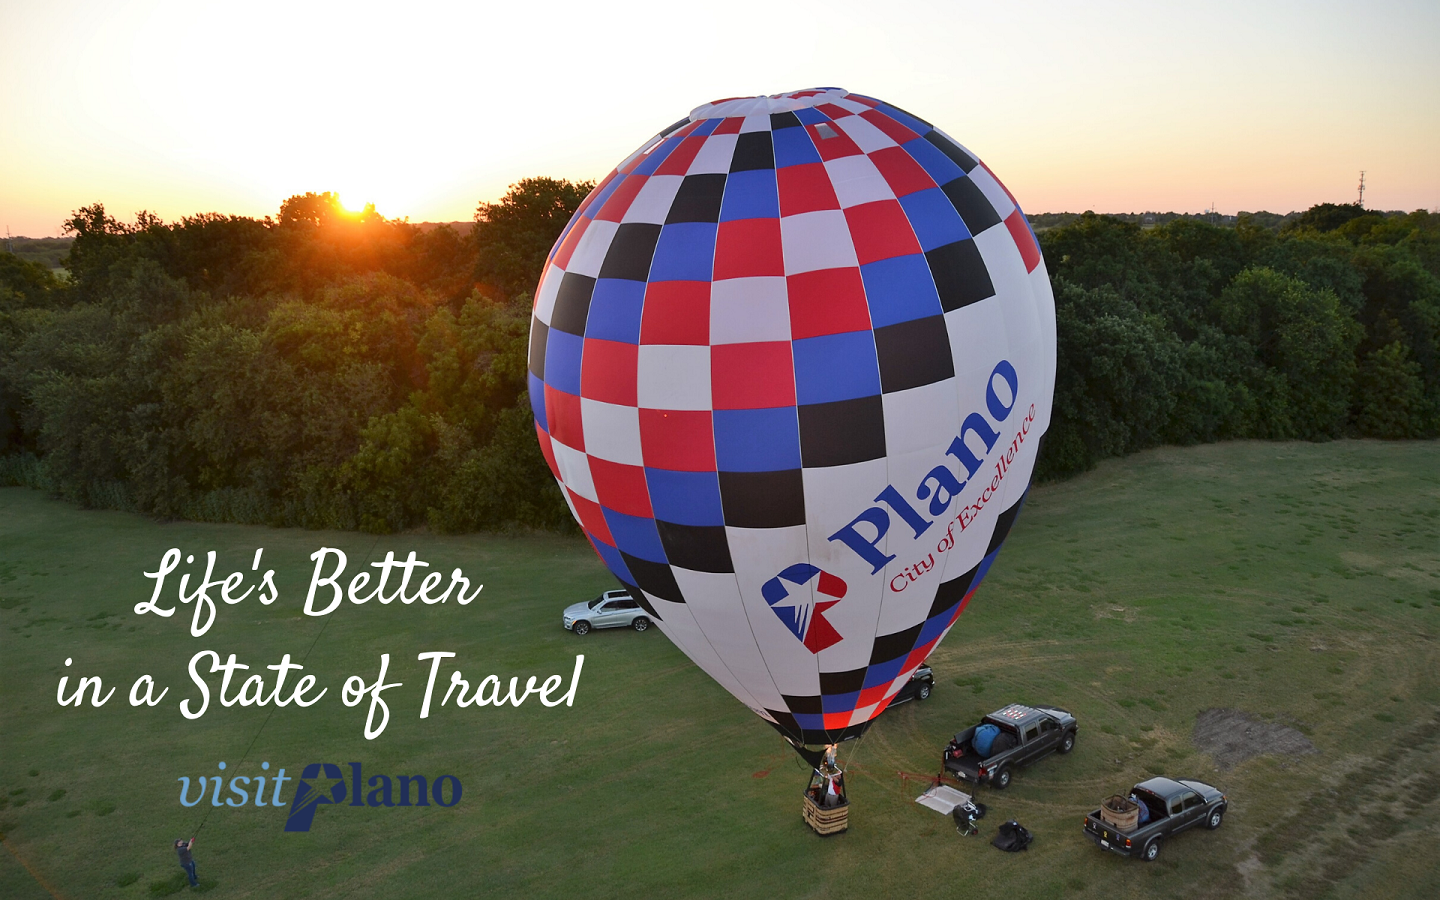 Life's Better in a State of Travel with the Plano hot air balloon and a sunrise